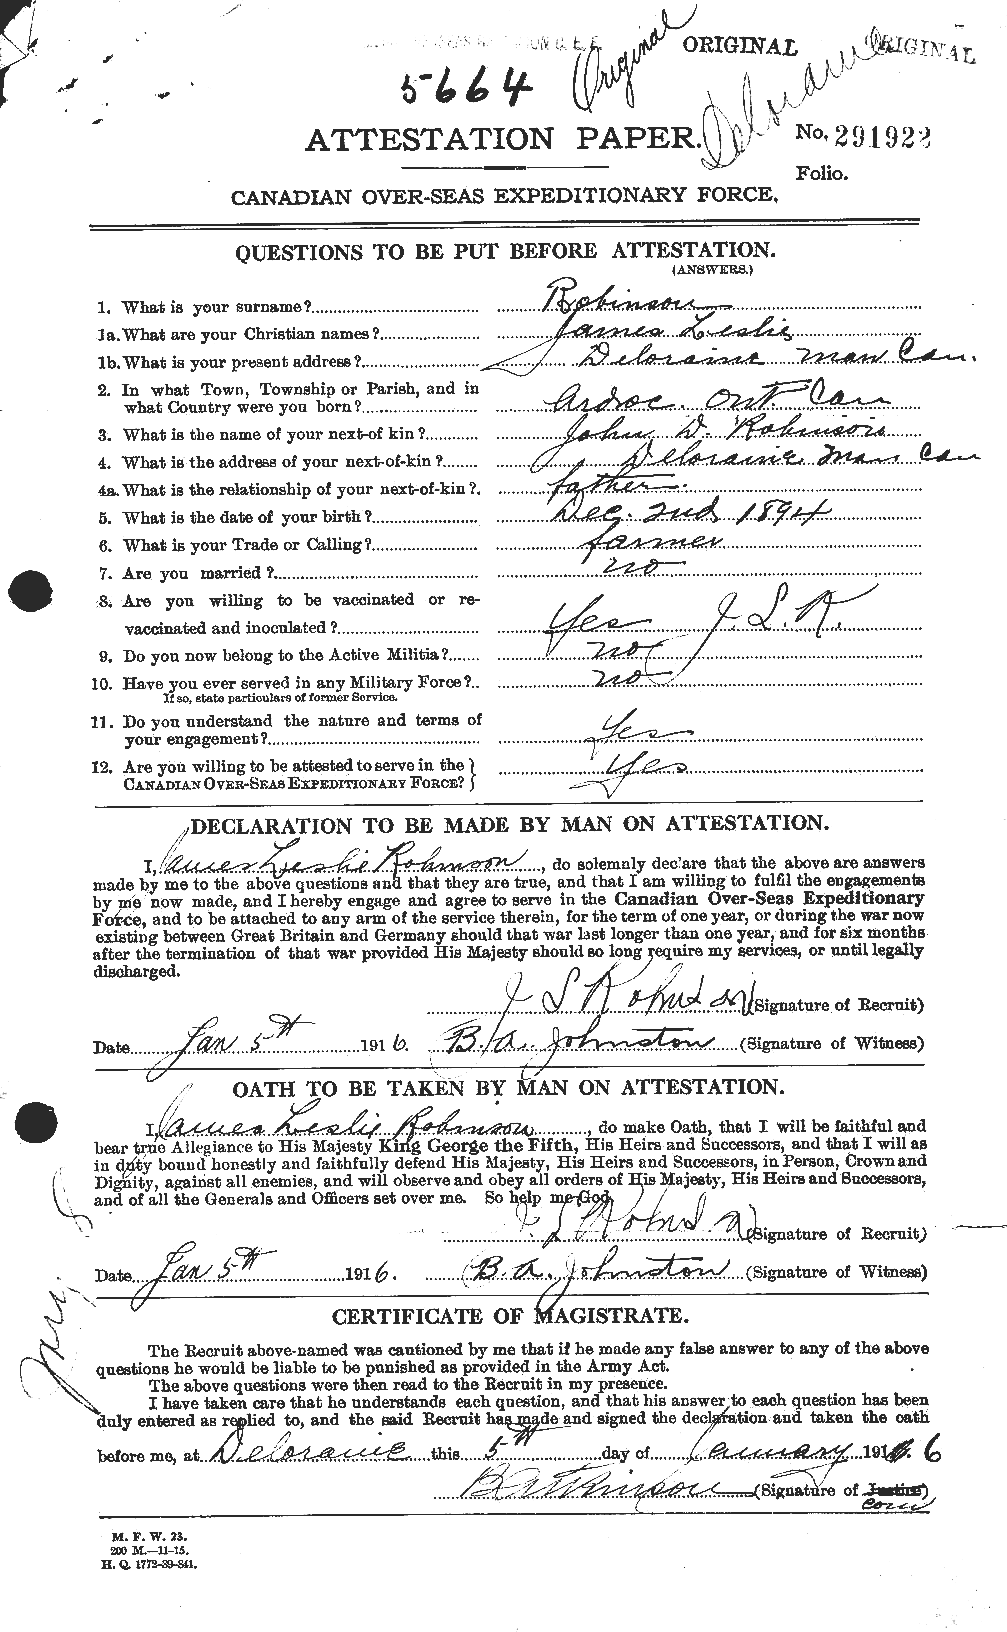 Personnel Records of the First World War - CEF 611472a